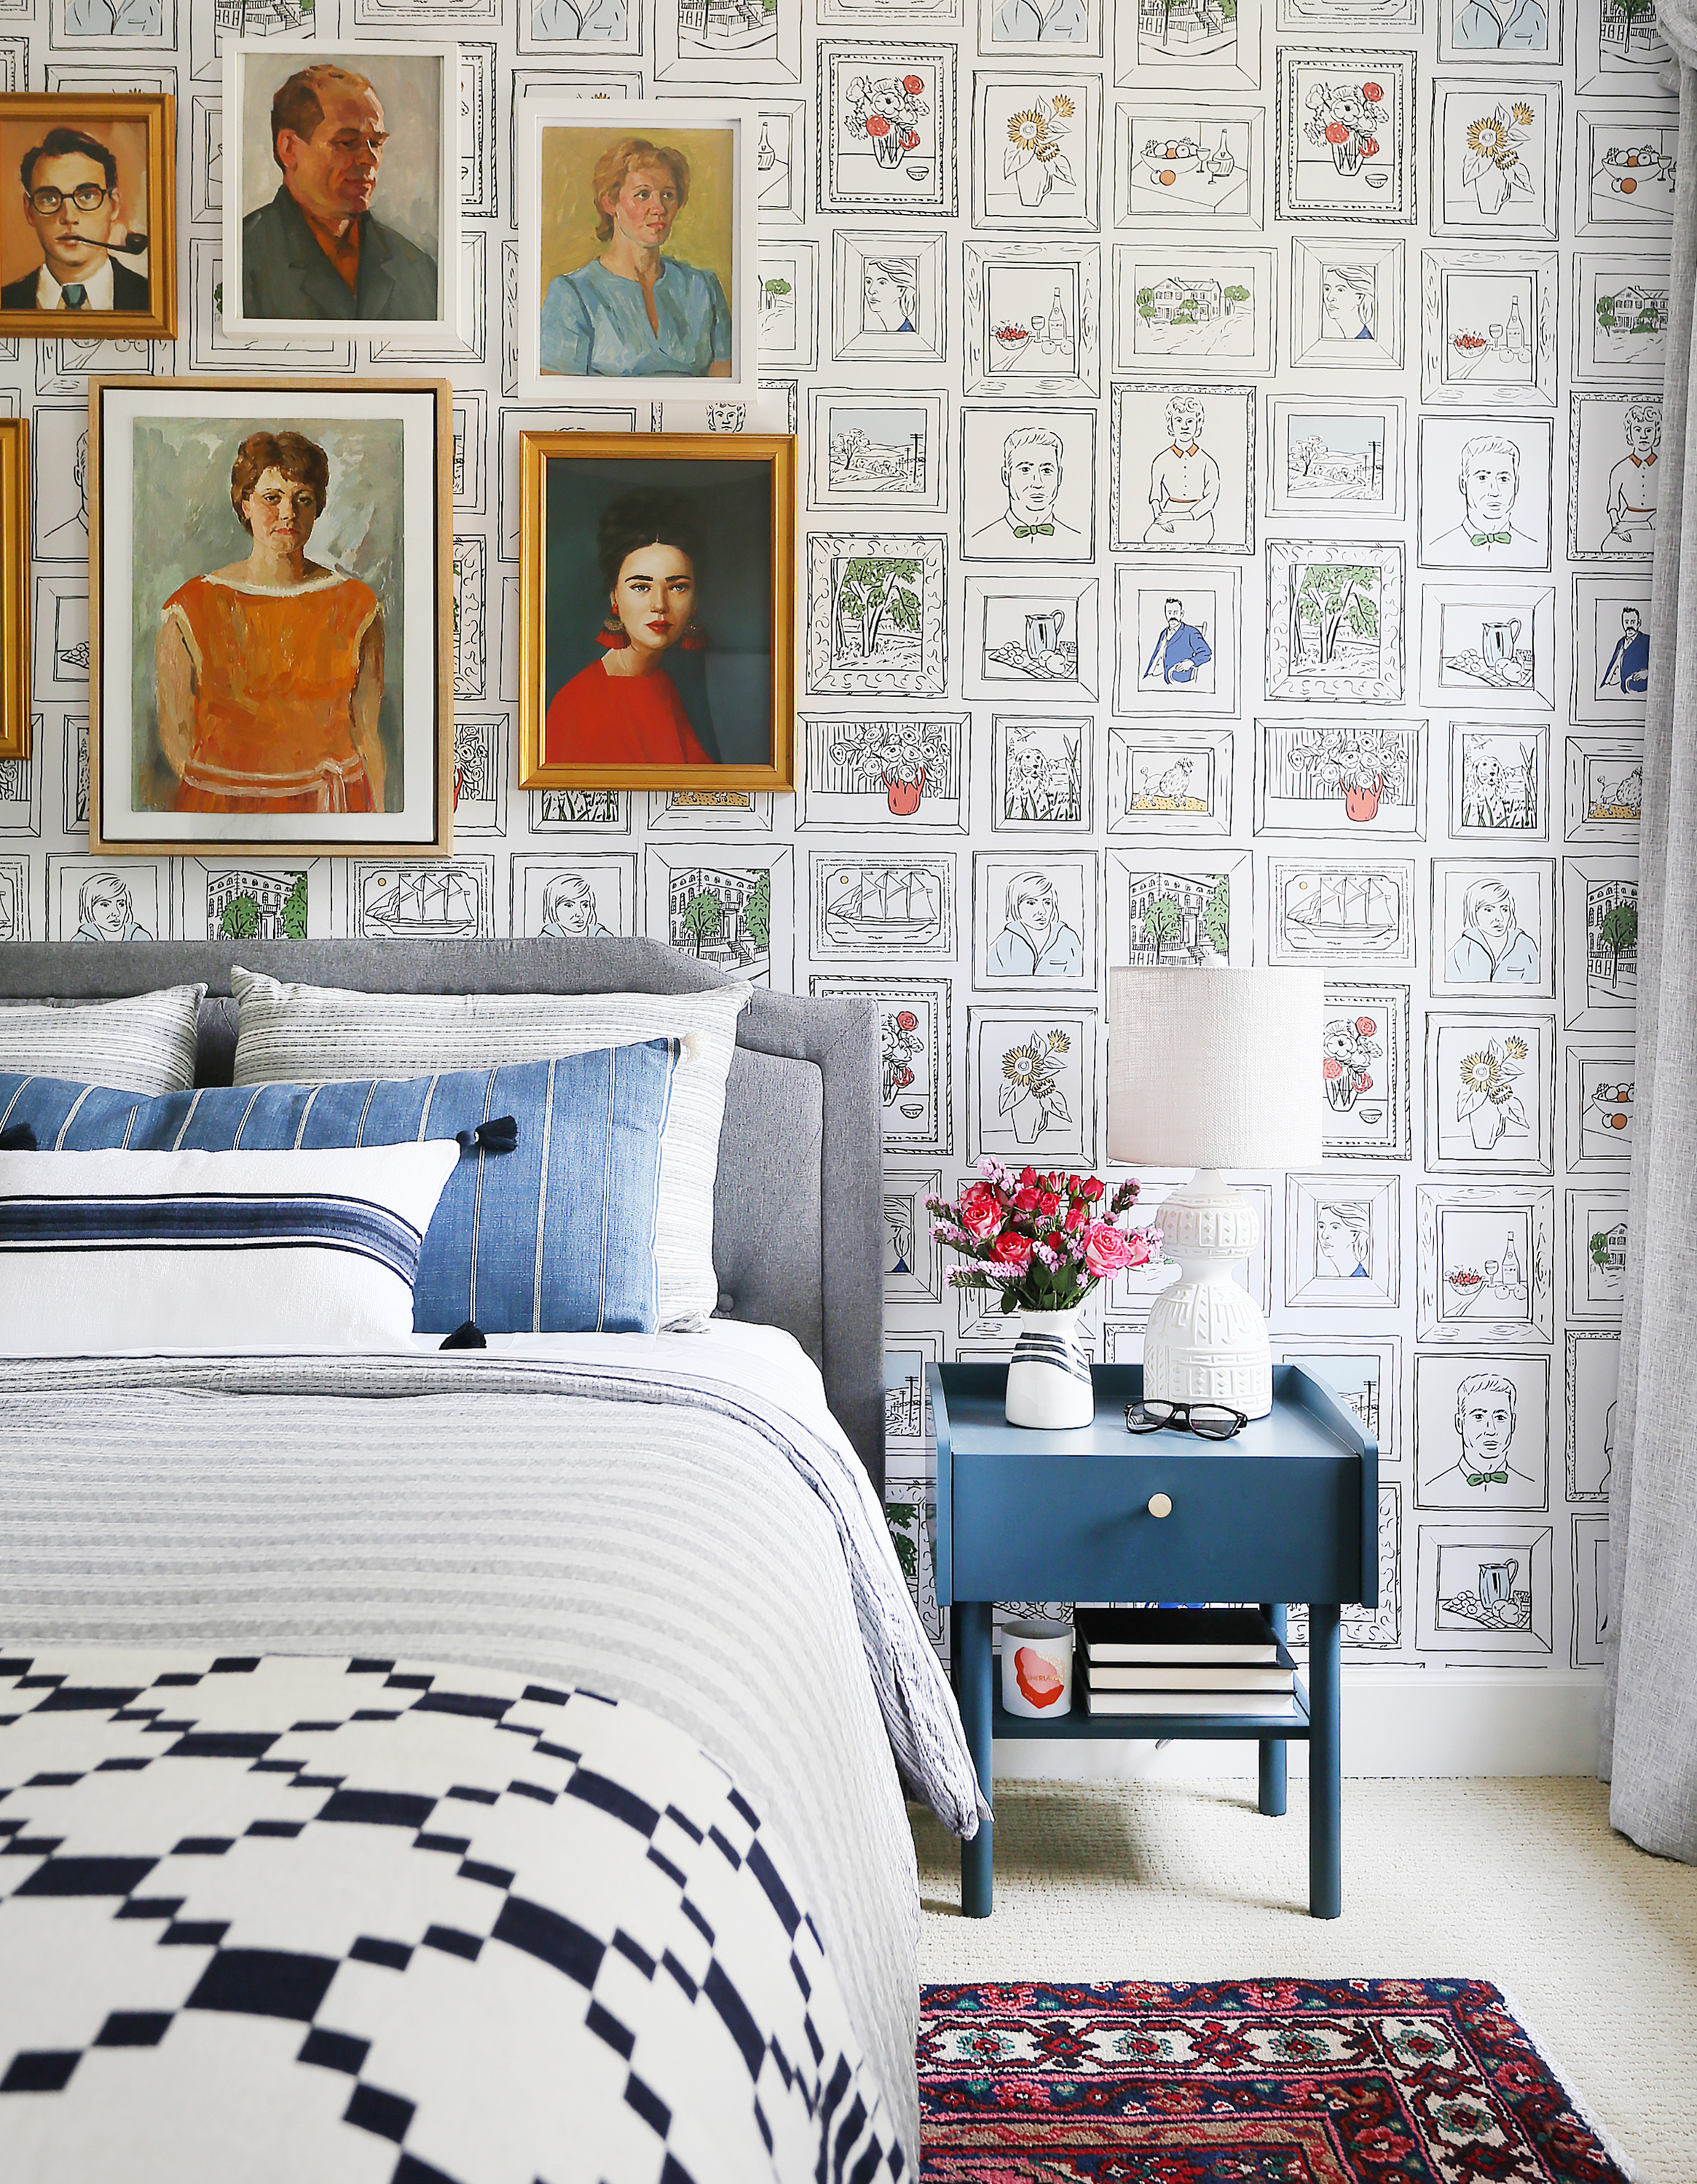 Chasing Paper portrait wallpaper in bedroom with grey upholstered bed frame and blue side table